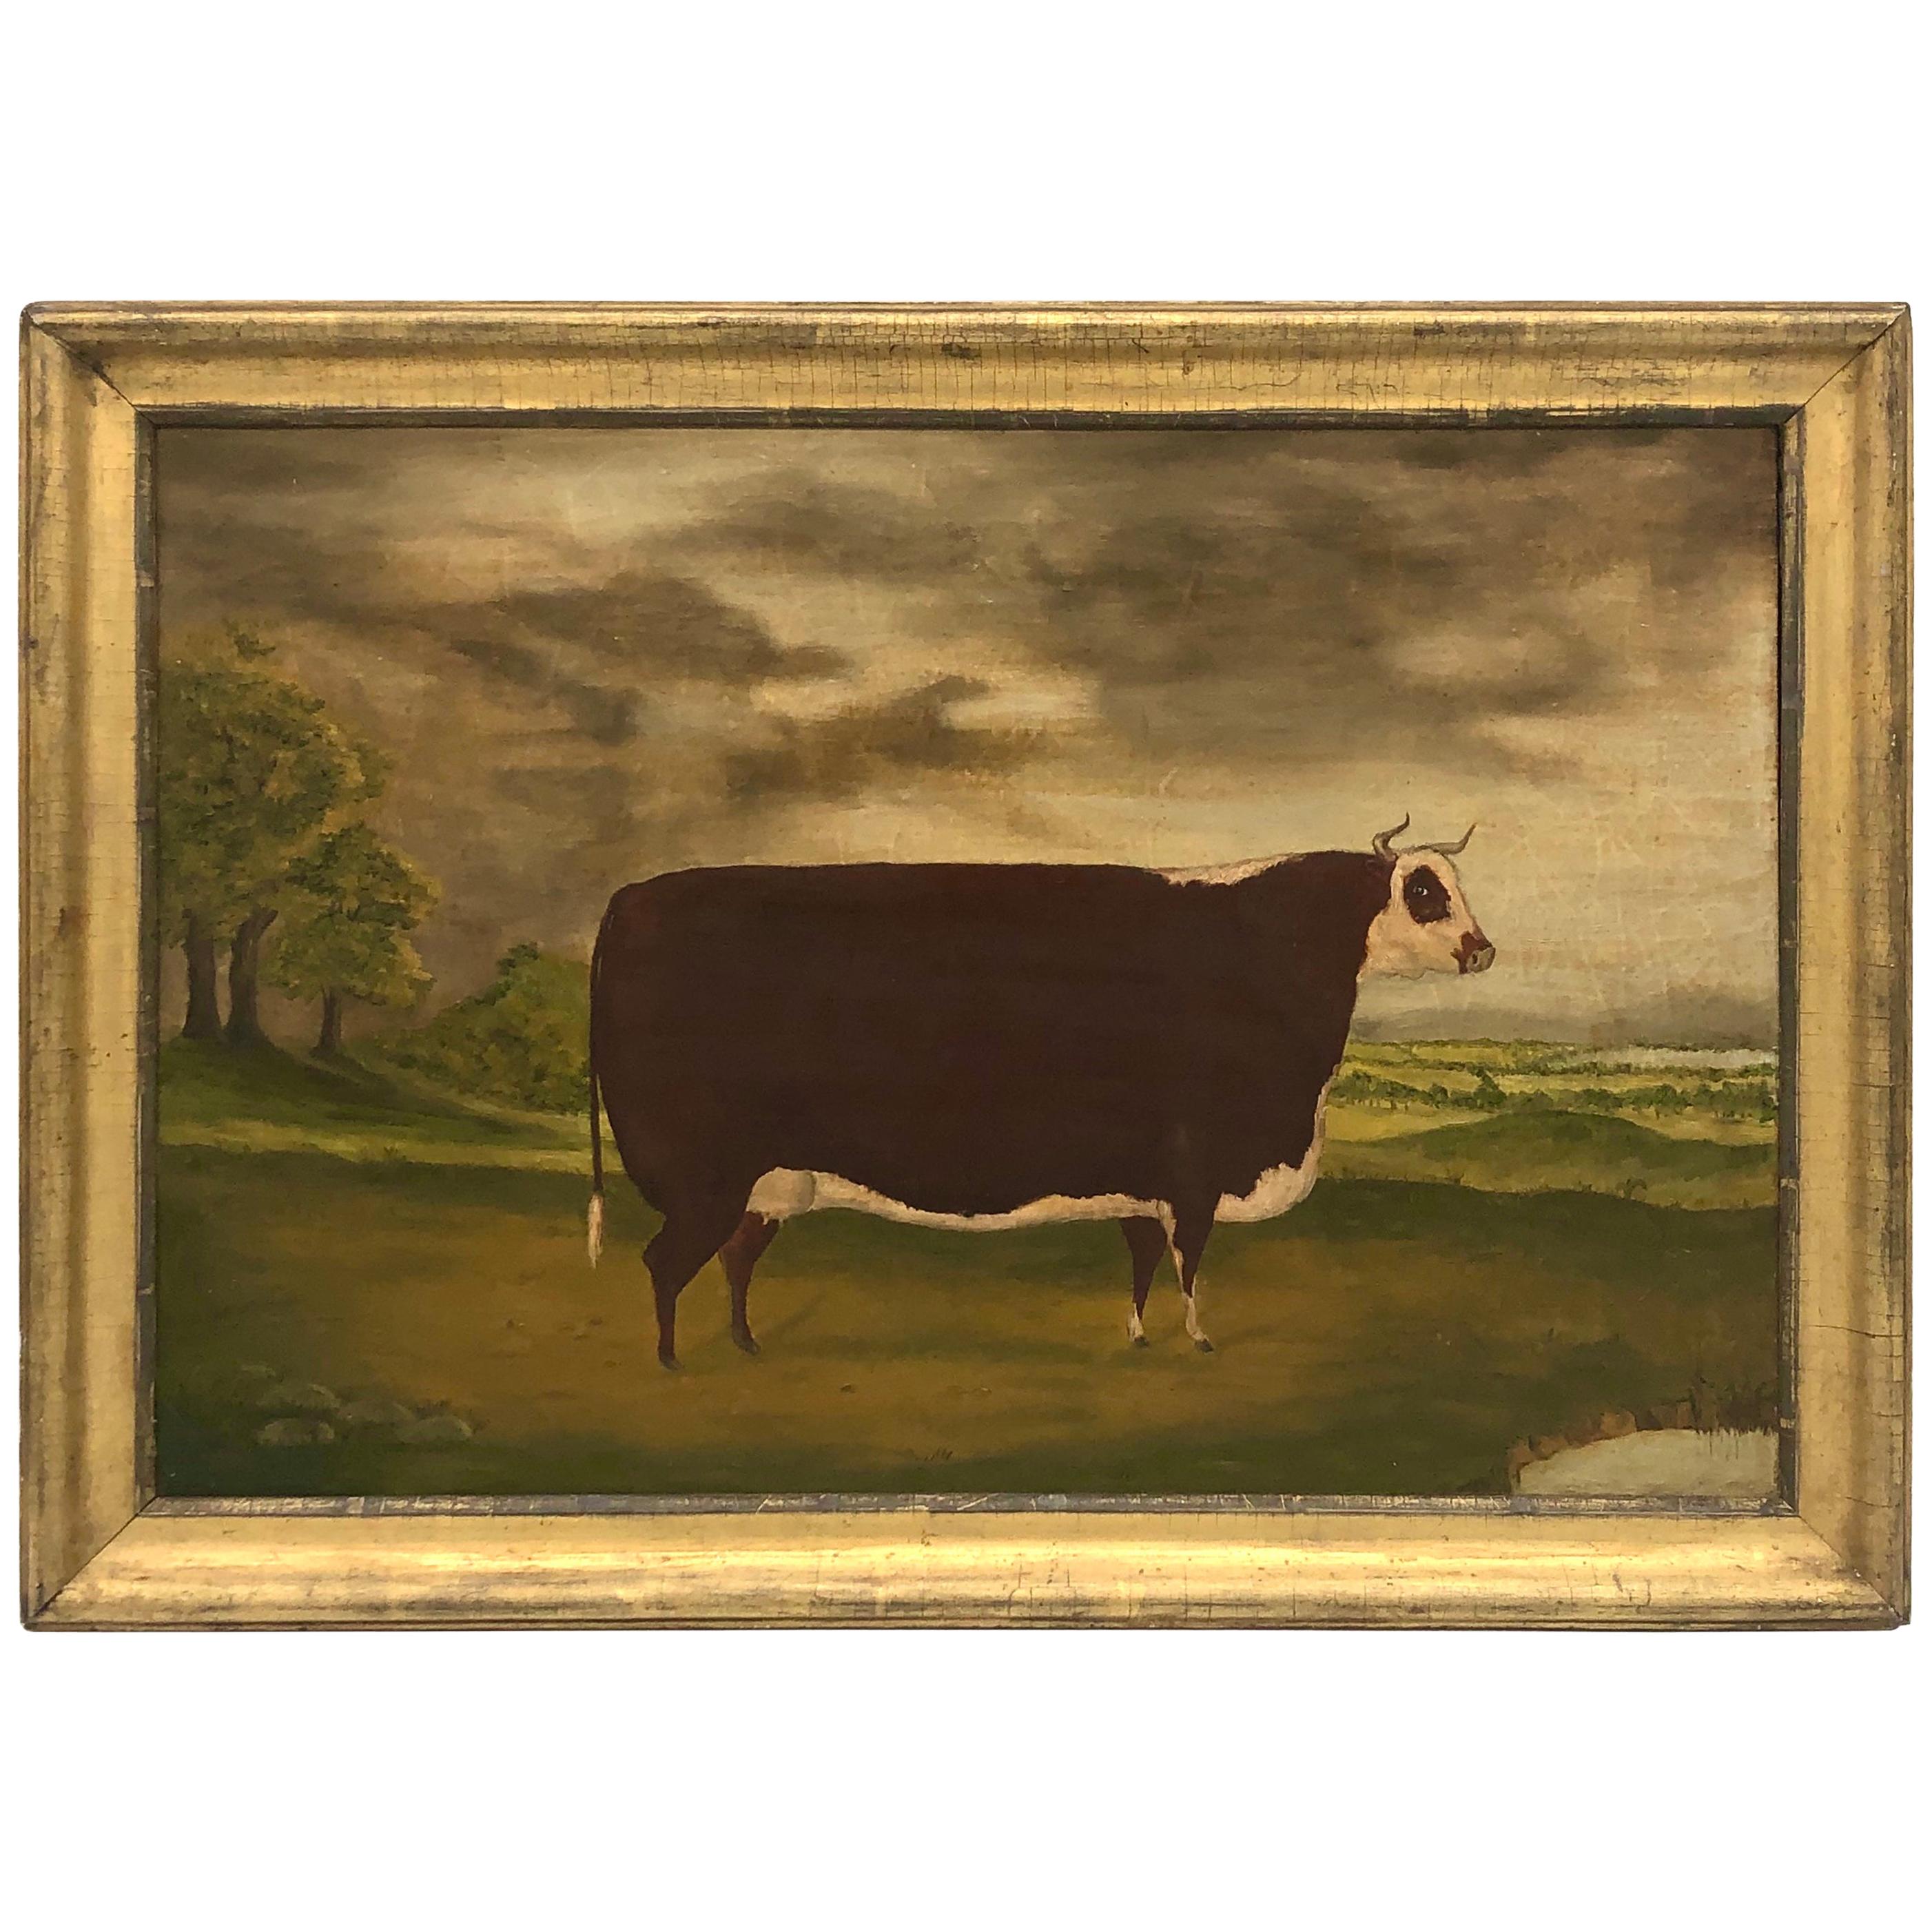 19th Century Folk Art Painting of a Prize Bull